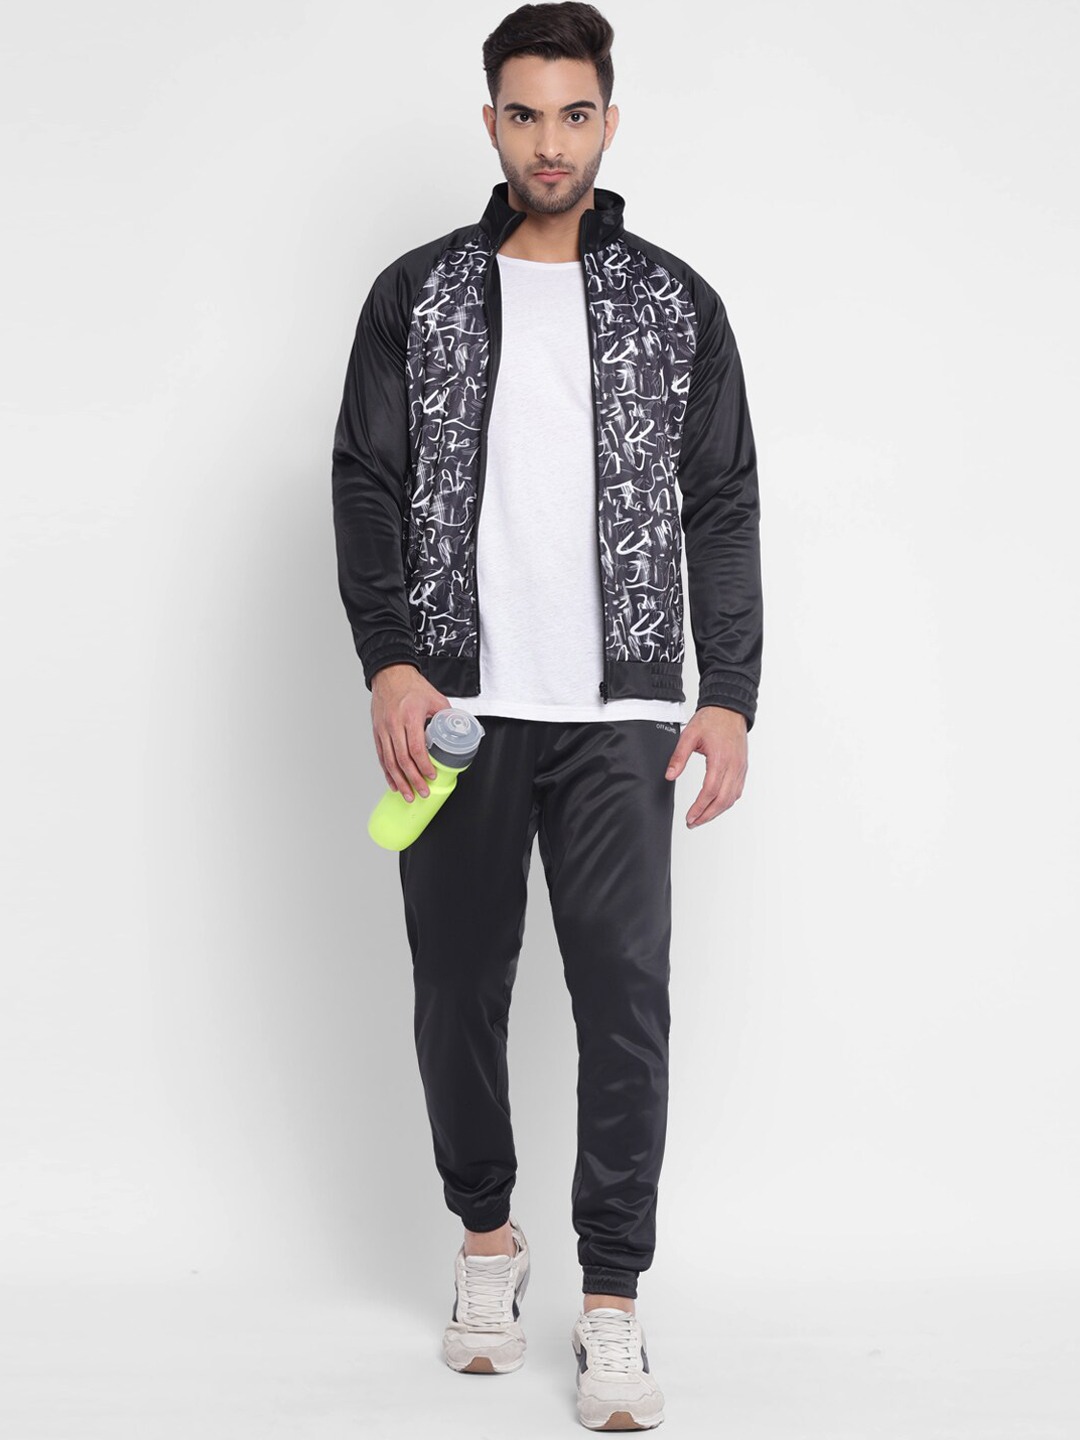 Clothing Tracksuits | OFF LIMITS Men Black Graphic Printed Tracksuits - ZG17654